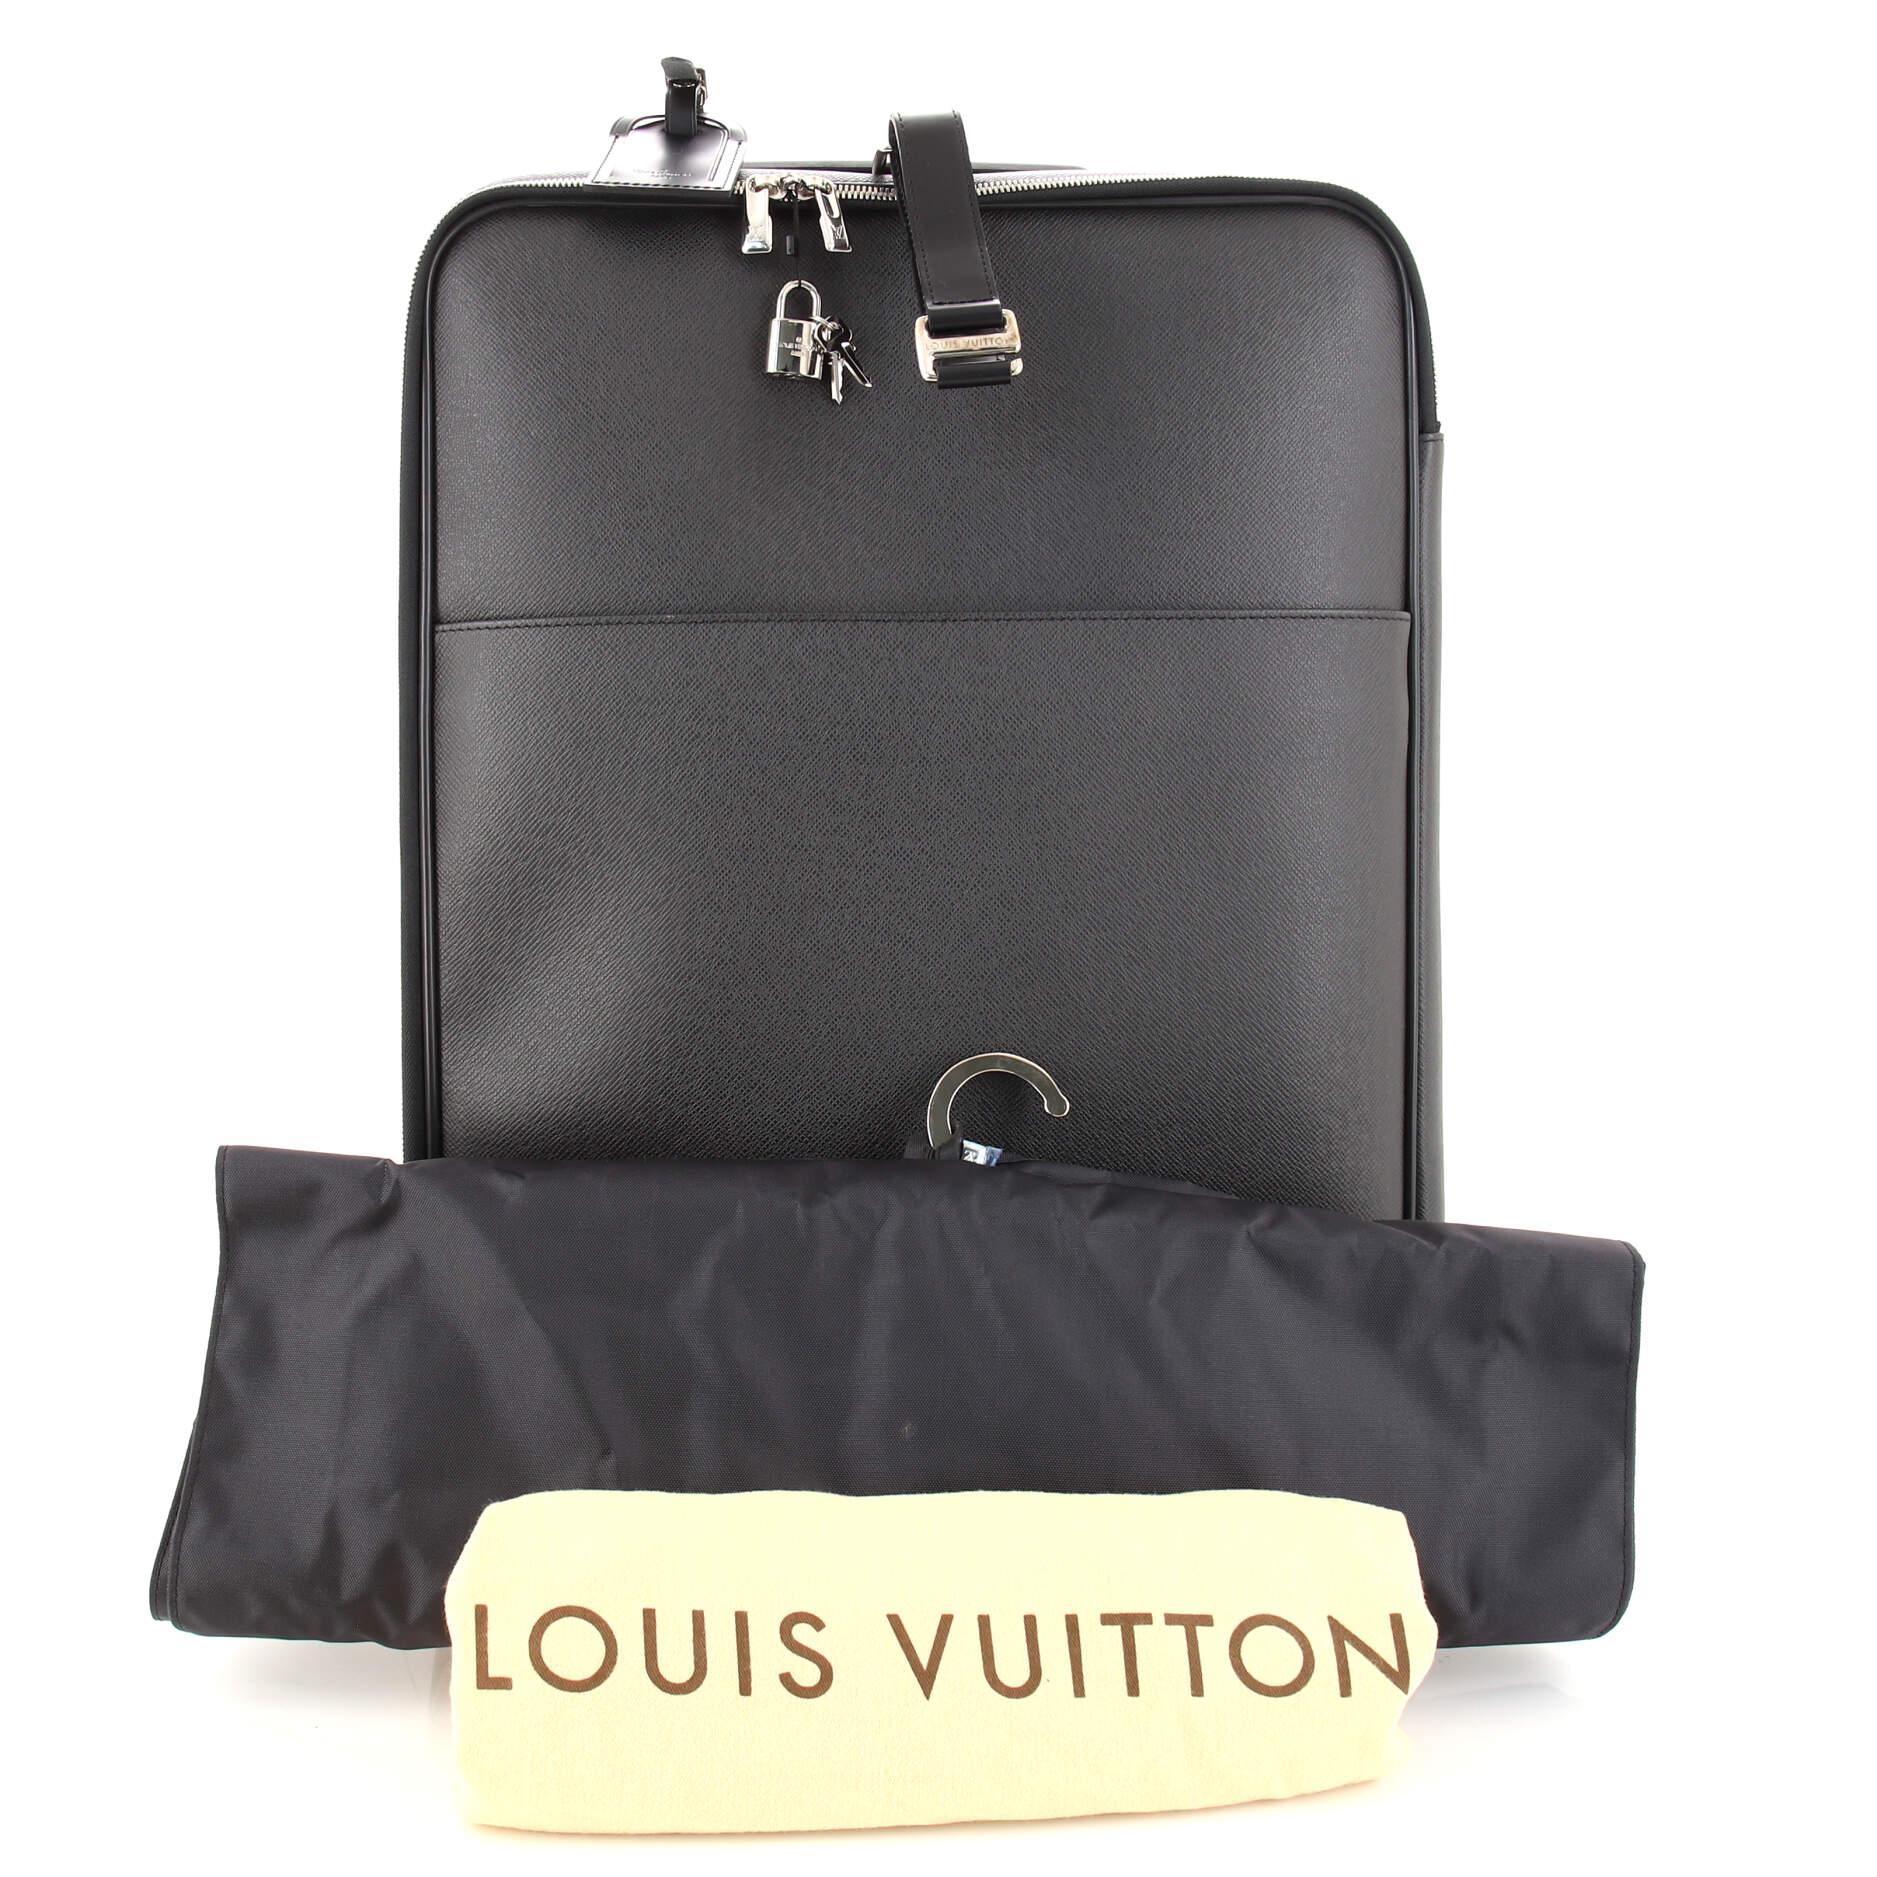 Condition: Very good. Minor wear, scuffs and creasing on exterior, wear and scuffs on exterior trims and handles, light wear in interior, scratches on hardware.
Accessories: Garment Bag, Lock, Hangers, Luggage Tag, Dust Bag, Protective Case,